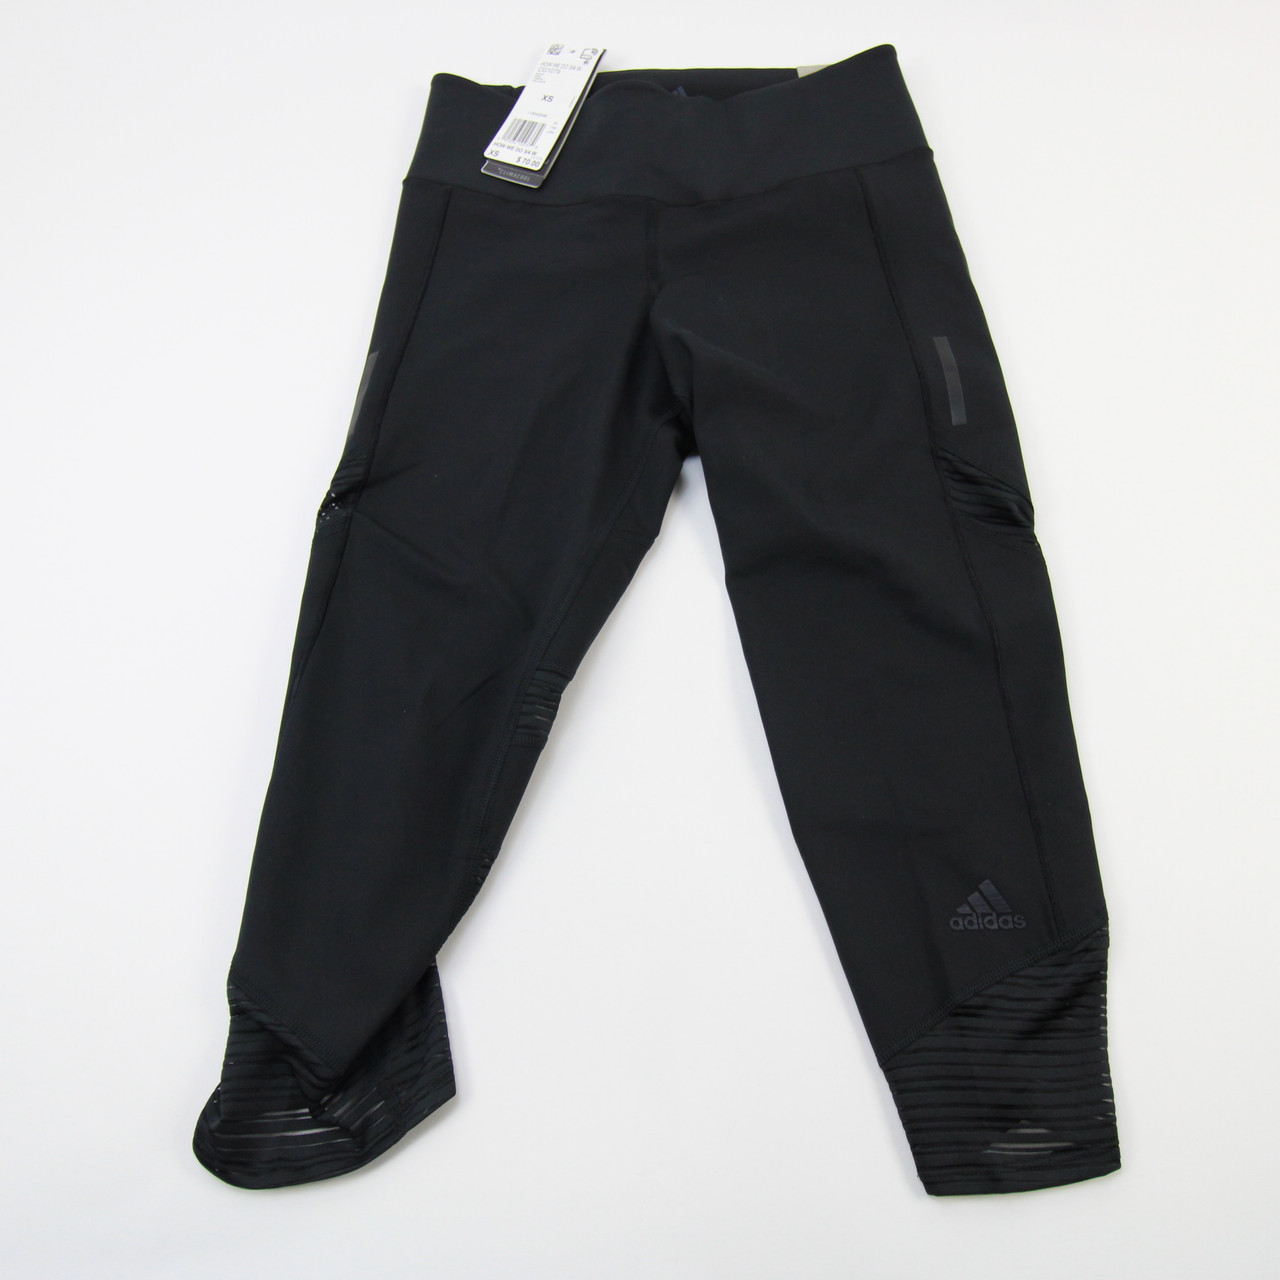 NWT Adidas Women’s Climaheat Seamless Running Tight Pants size XS Black  BR6794